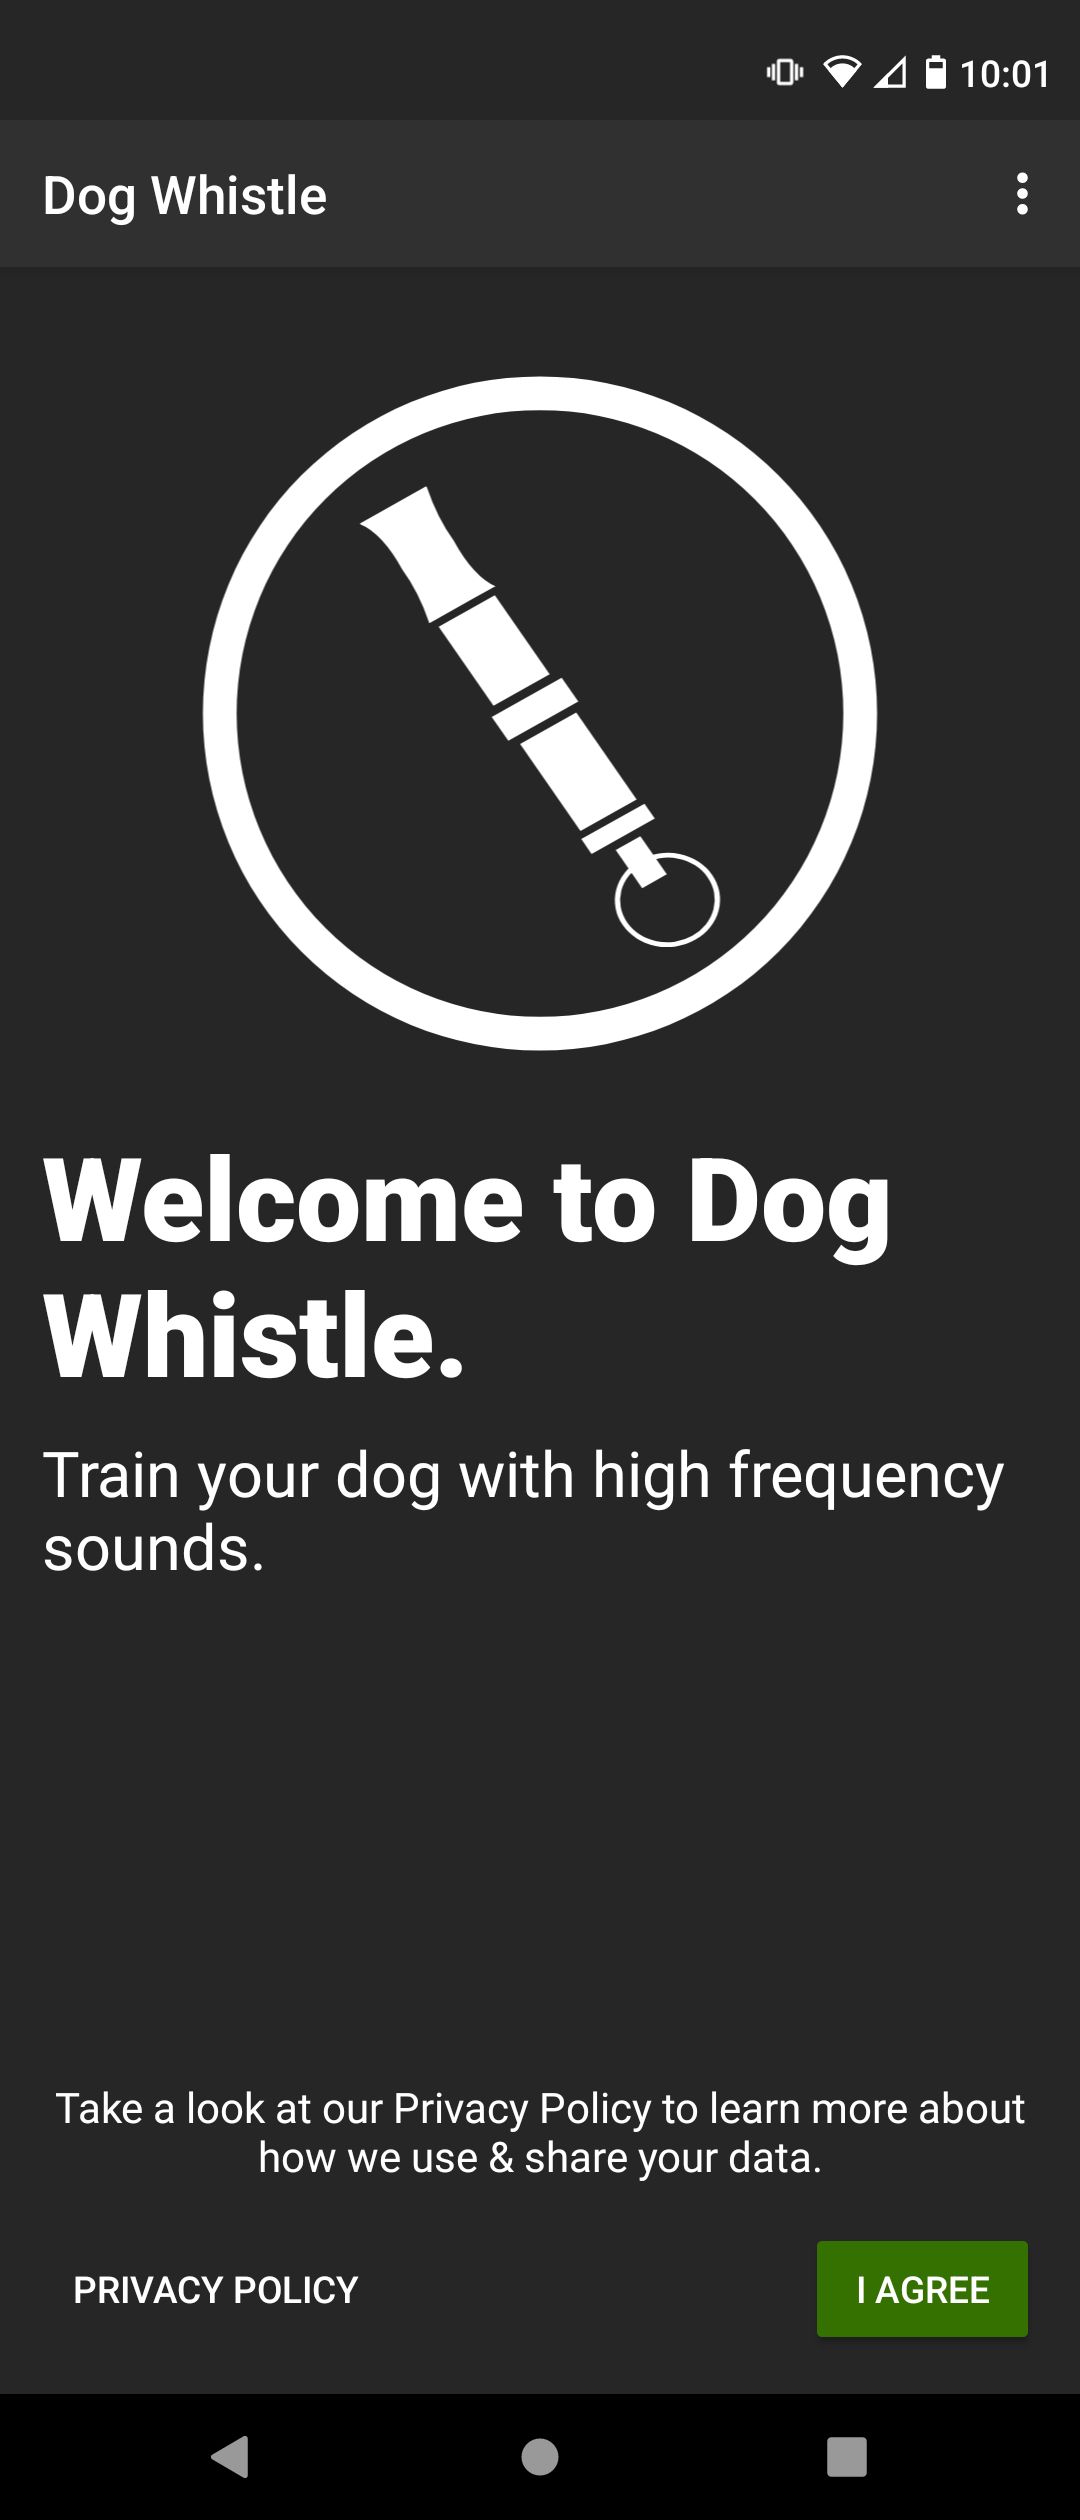 Dog Whistle App Description on Android